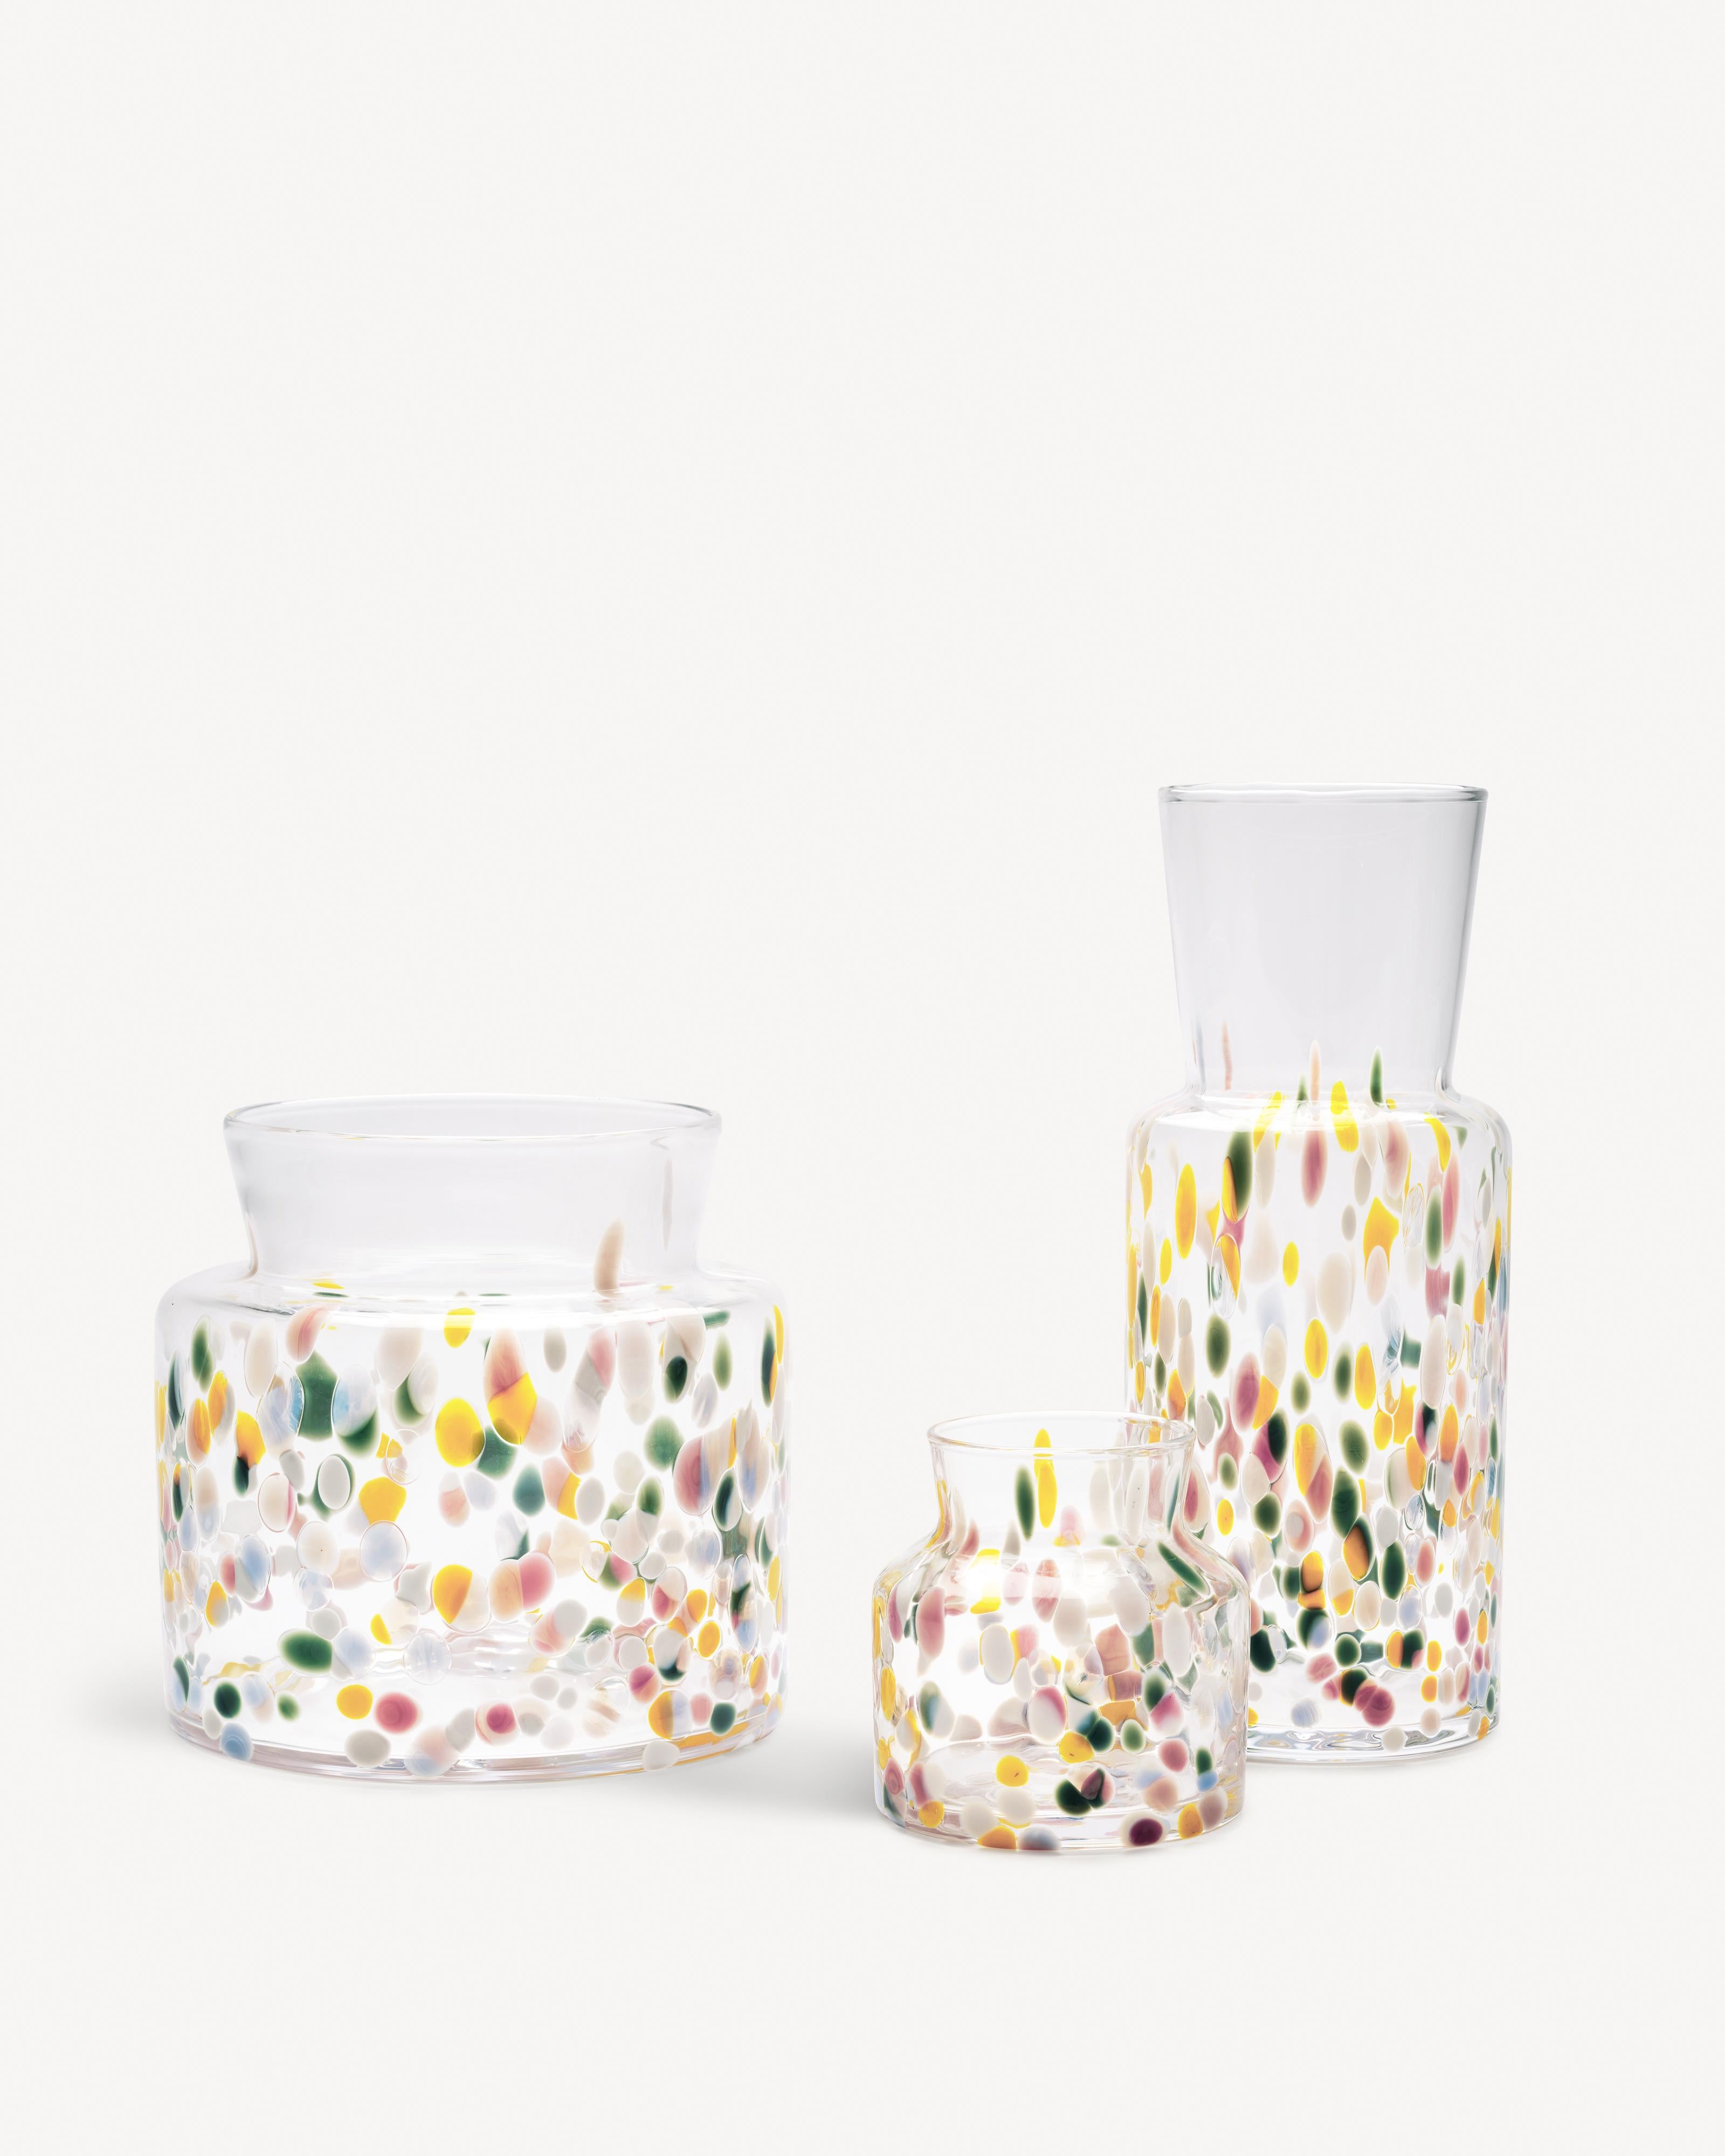 Meadow Spring is as colorful and lively as a flower meadow that comes to life during the first sunny days of spring. During the production the vases are rolled in crushed pieces of colored glass, which makes each vase unique. The small vase from